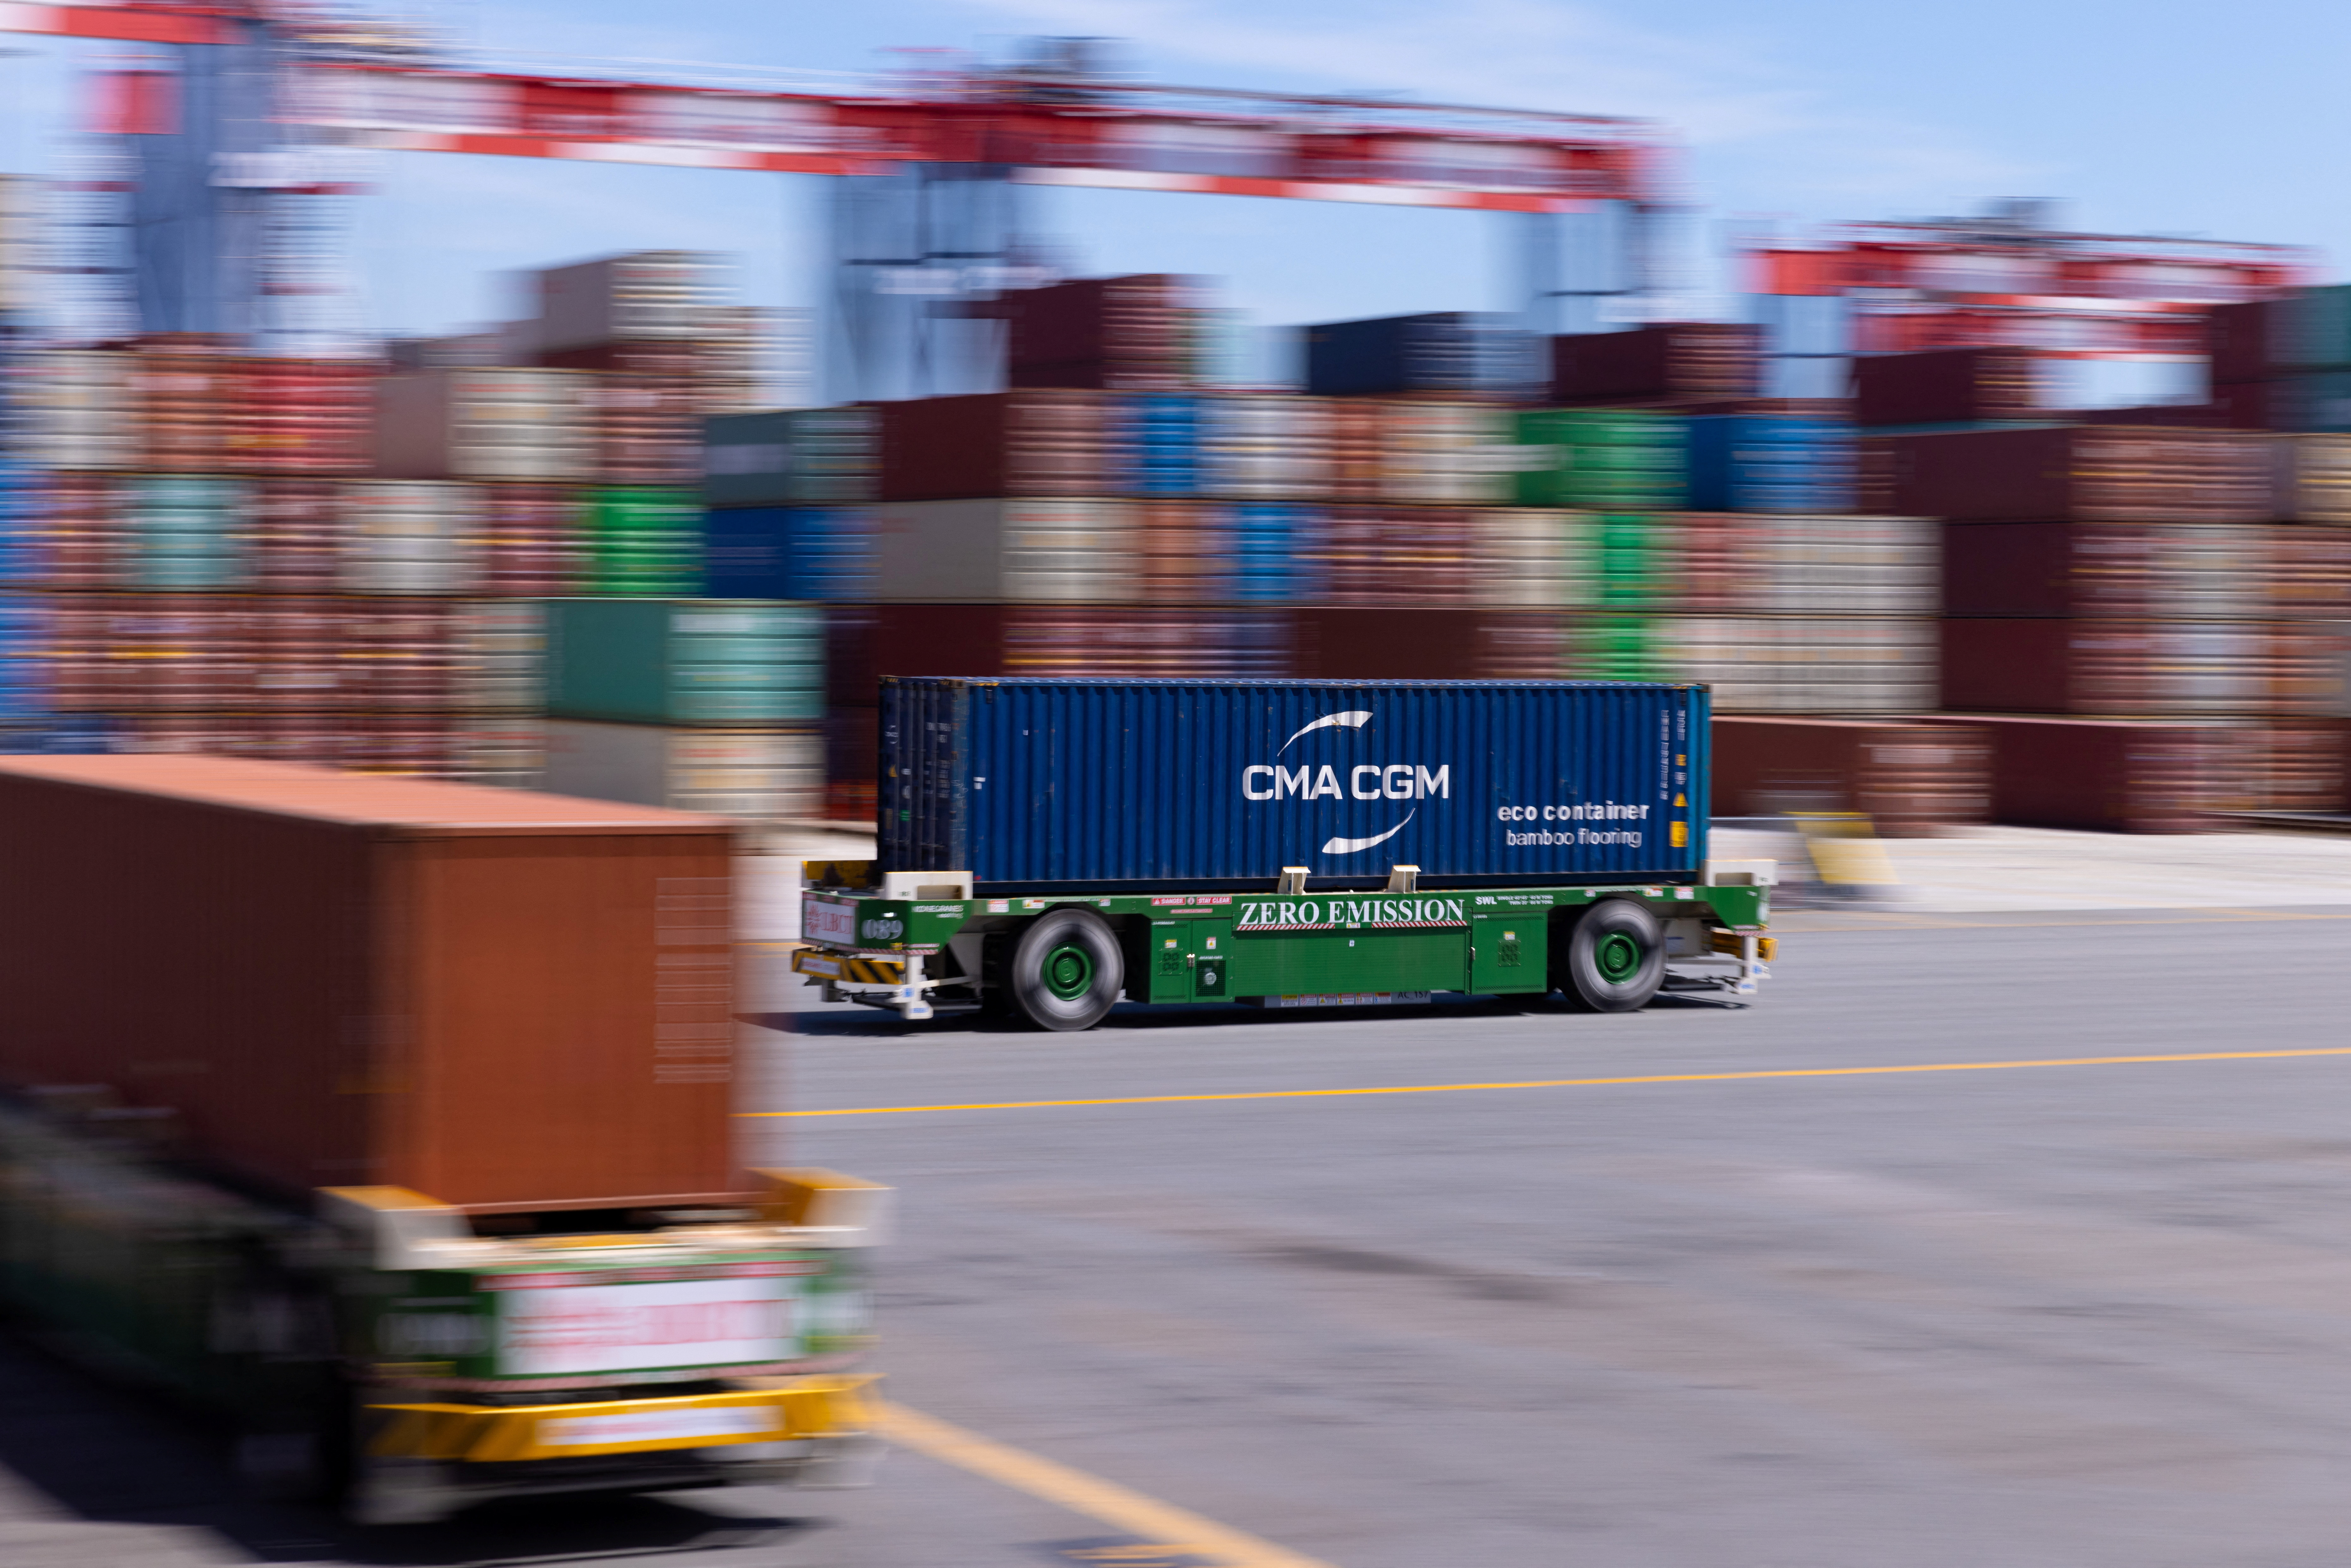 Automation expands at Long Beach Container Terminal in California